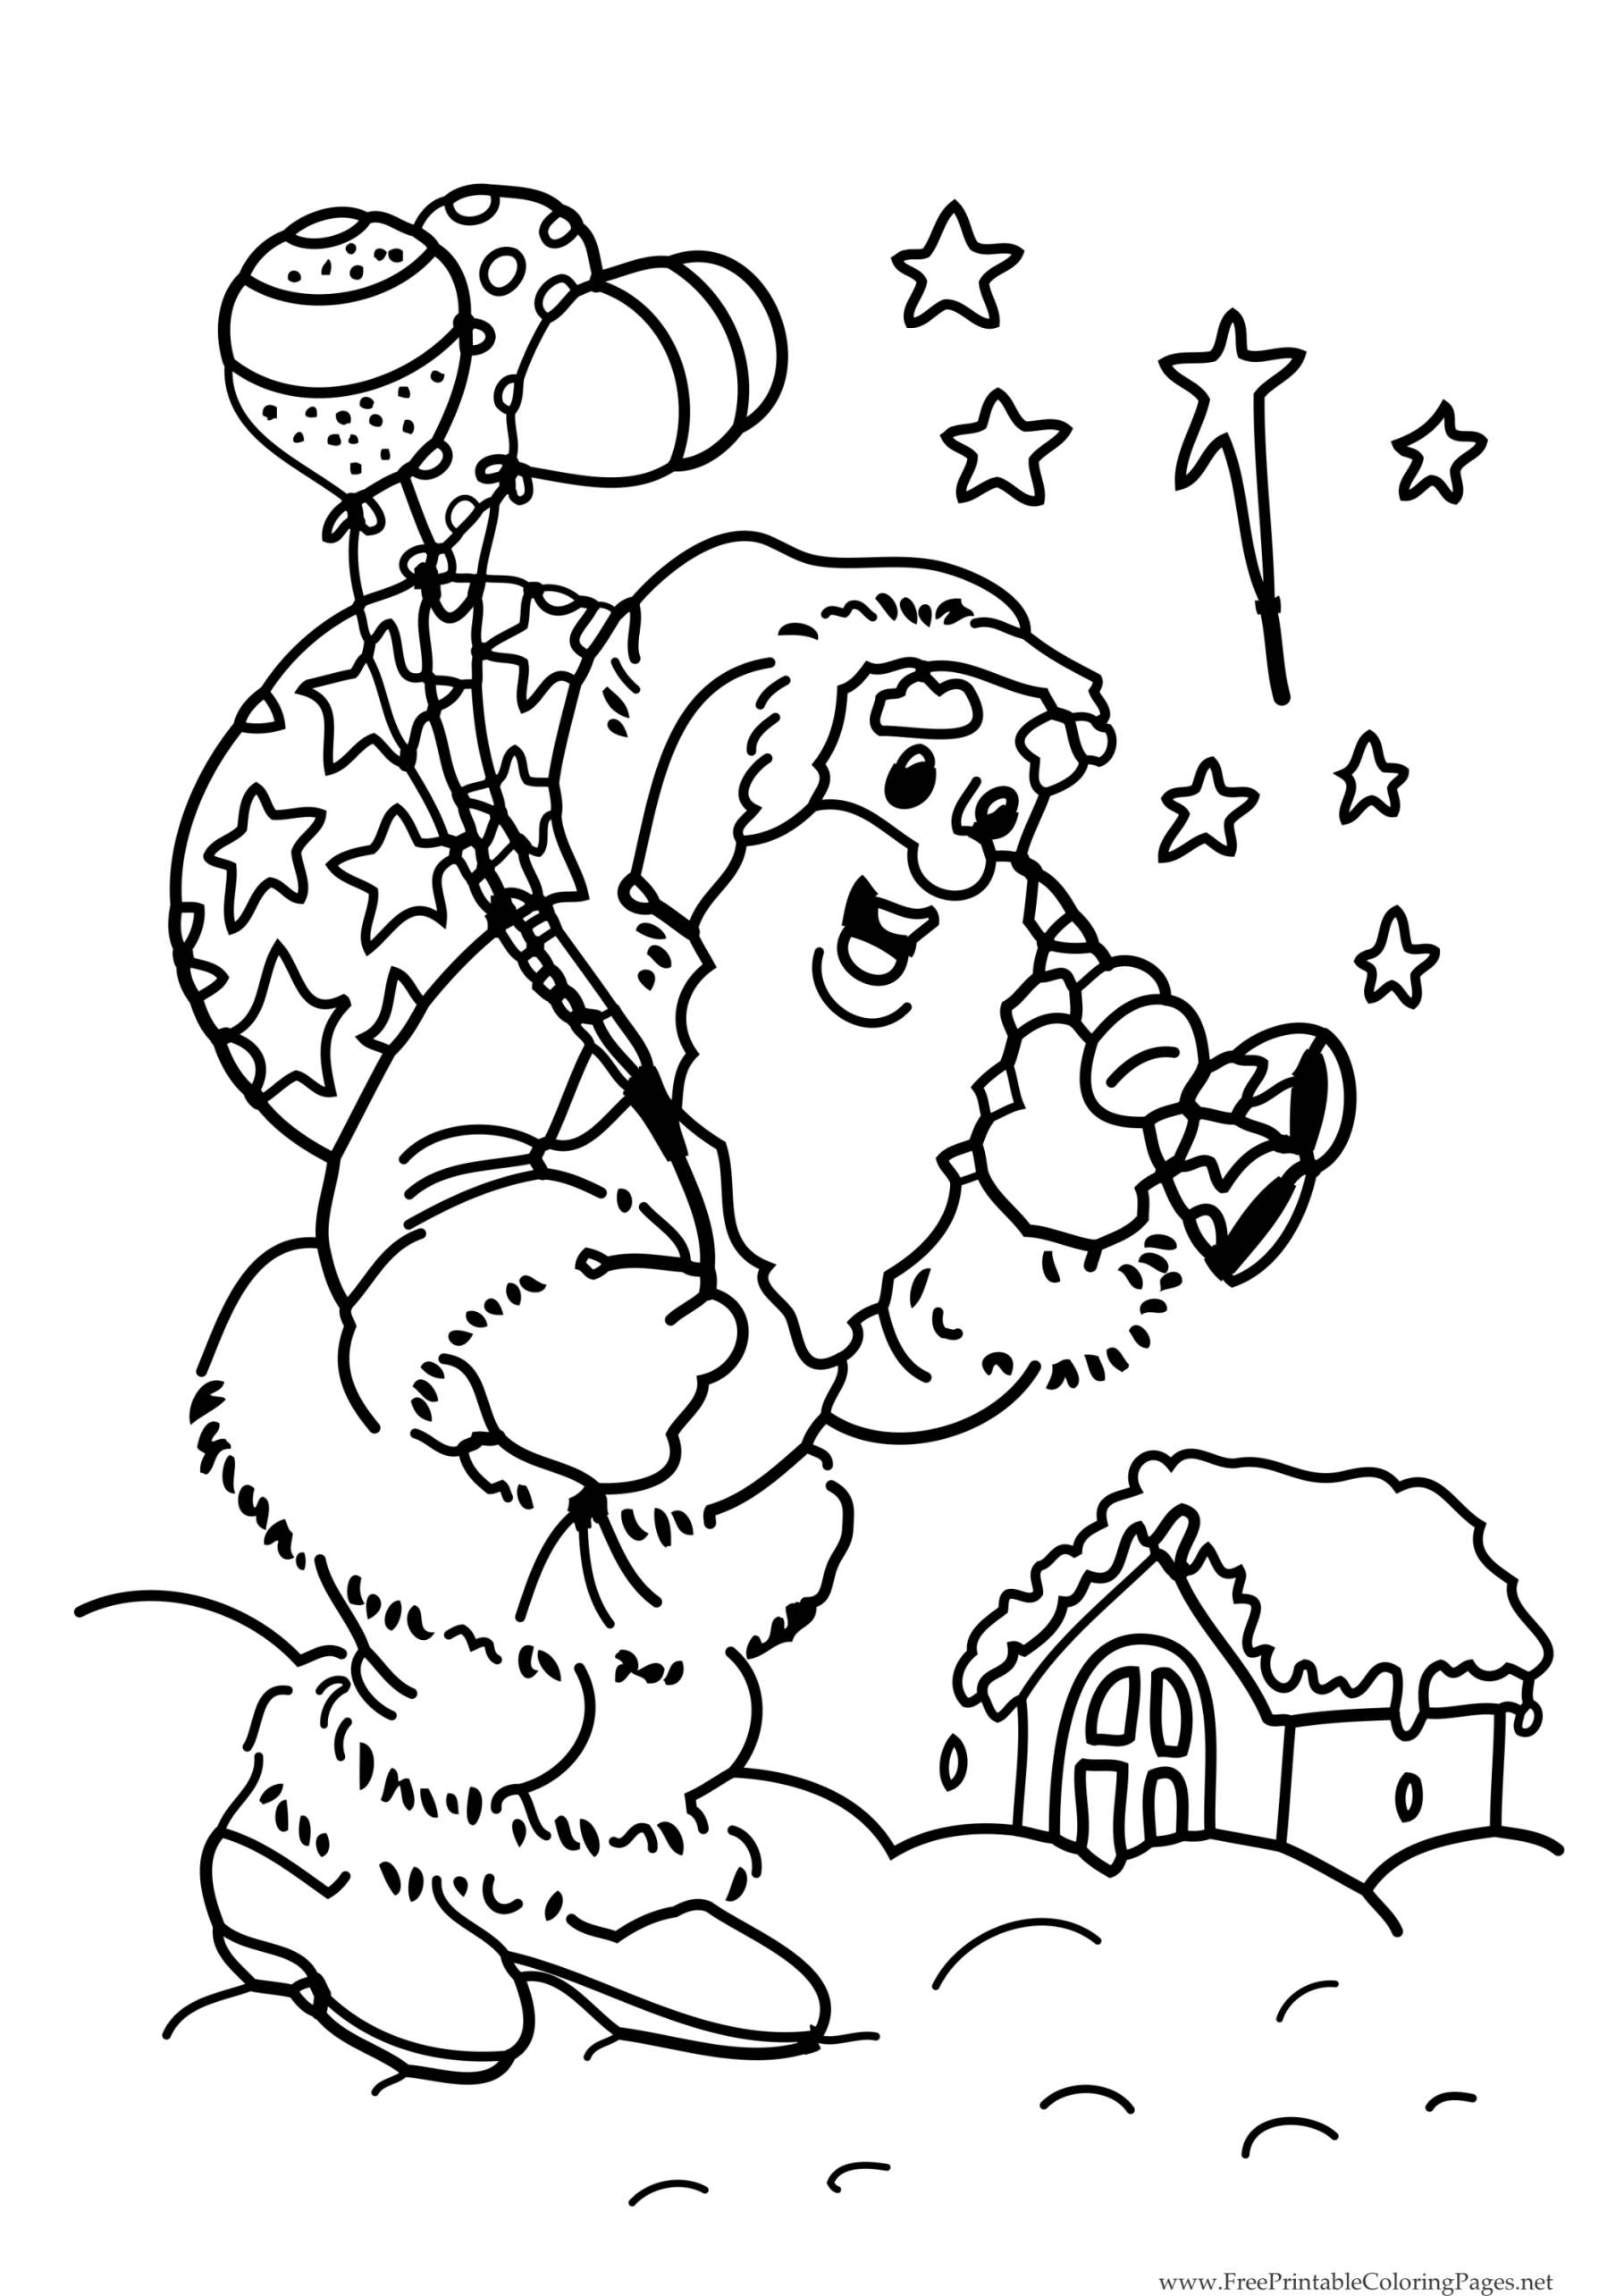 Free Santa Claus coloring book, ready for the annual distribution of gifts to children who have been good